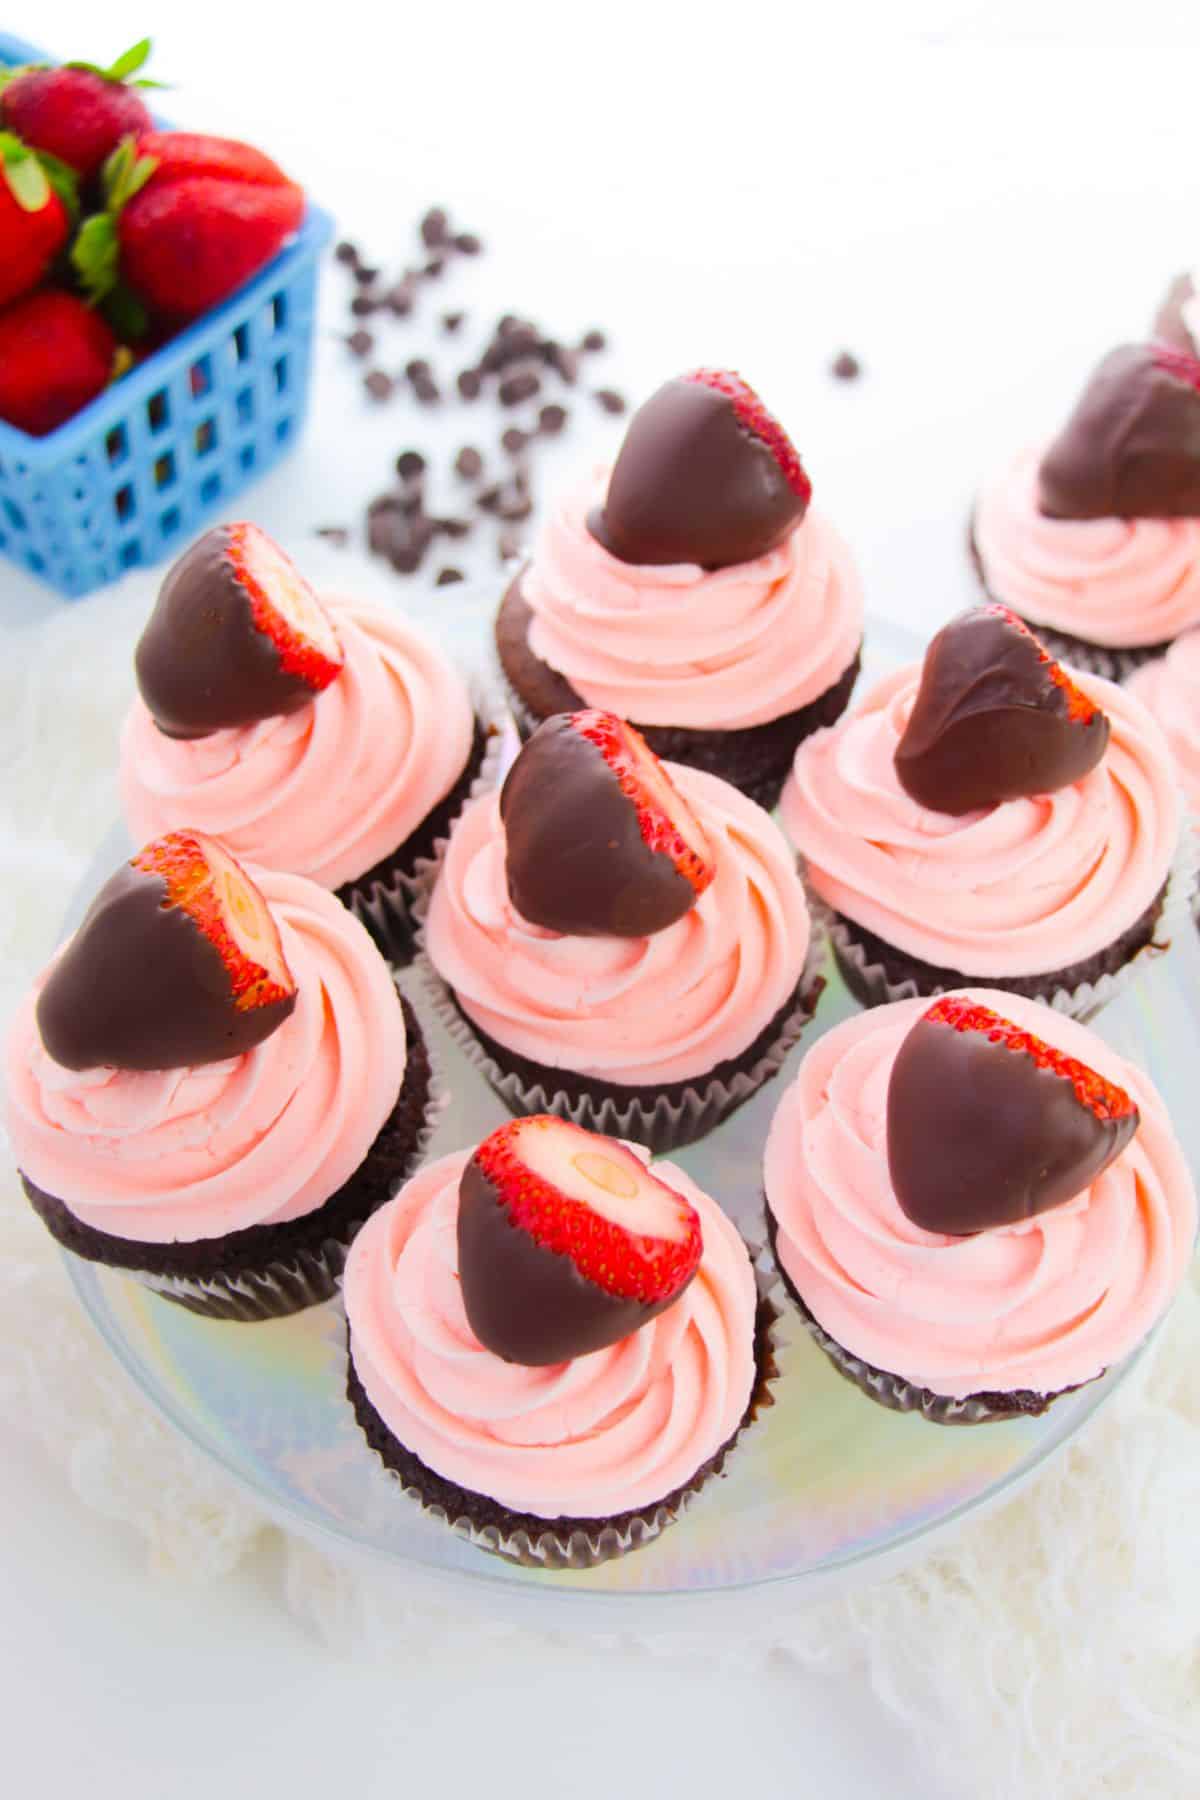 Chocolate Strawberry Cupcakes on a serving plate, with strawberries and chocolates on the side.